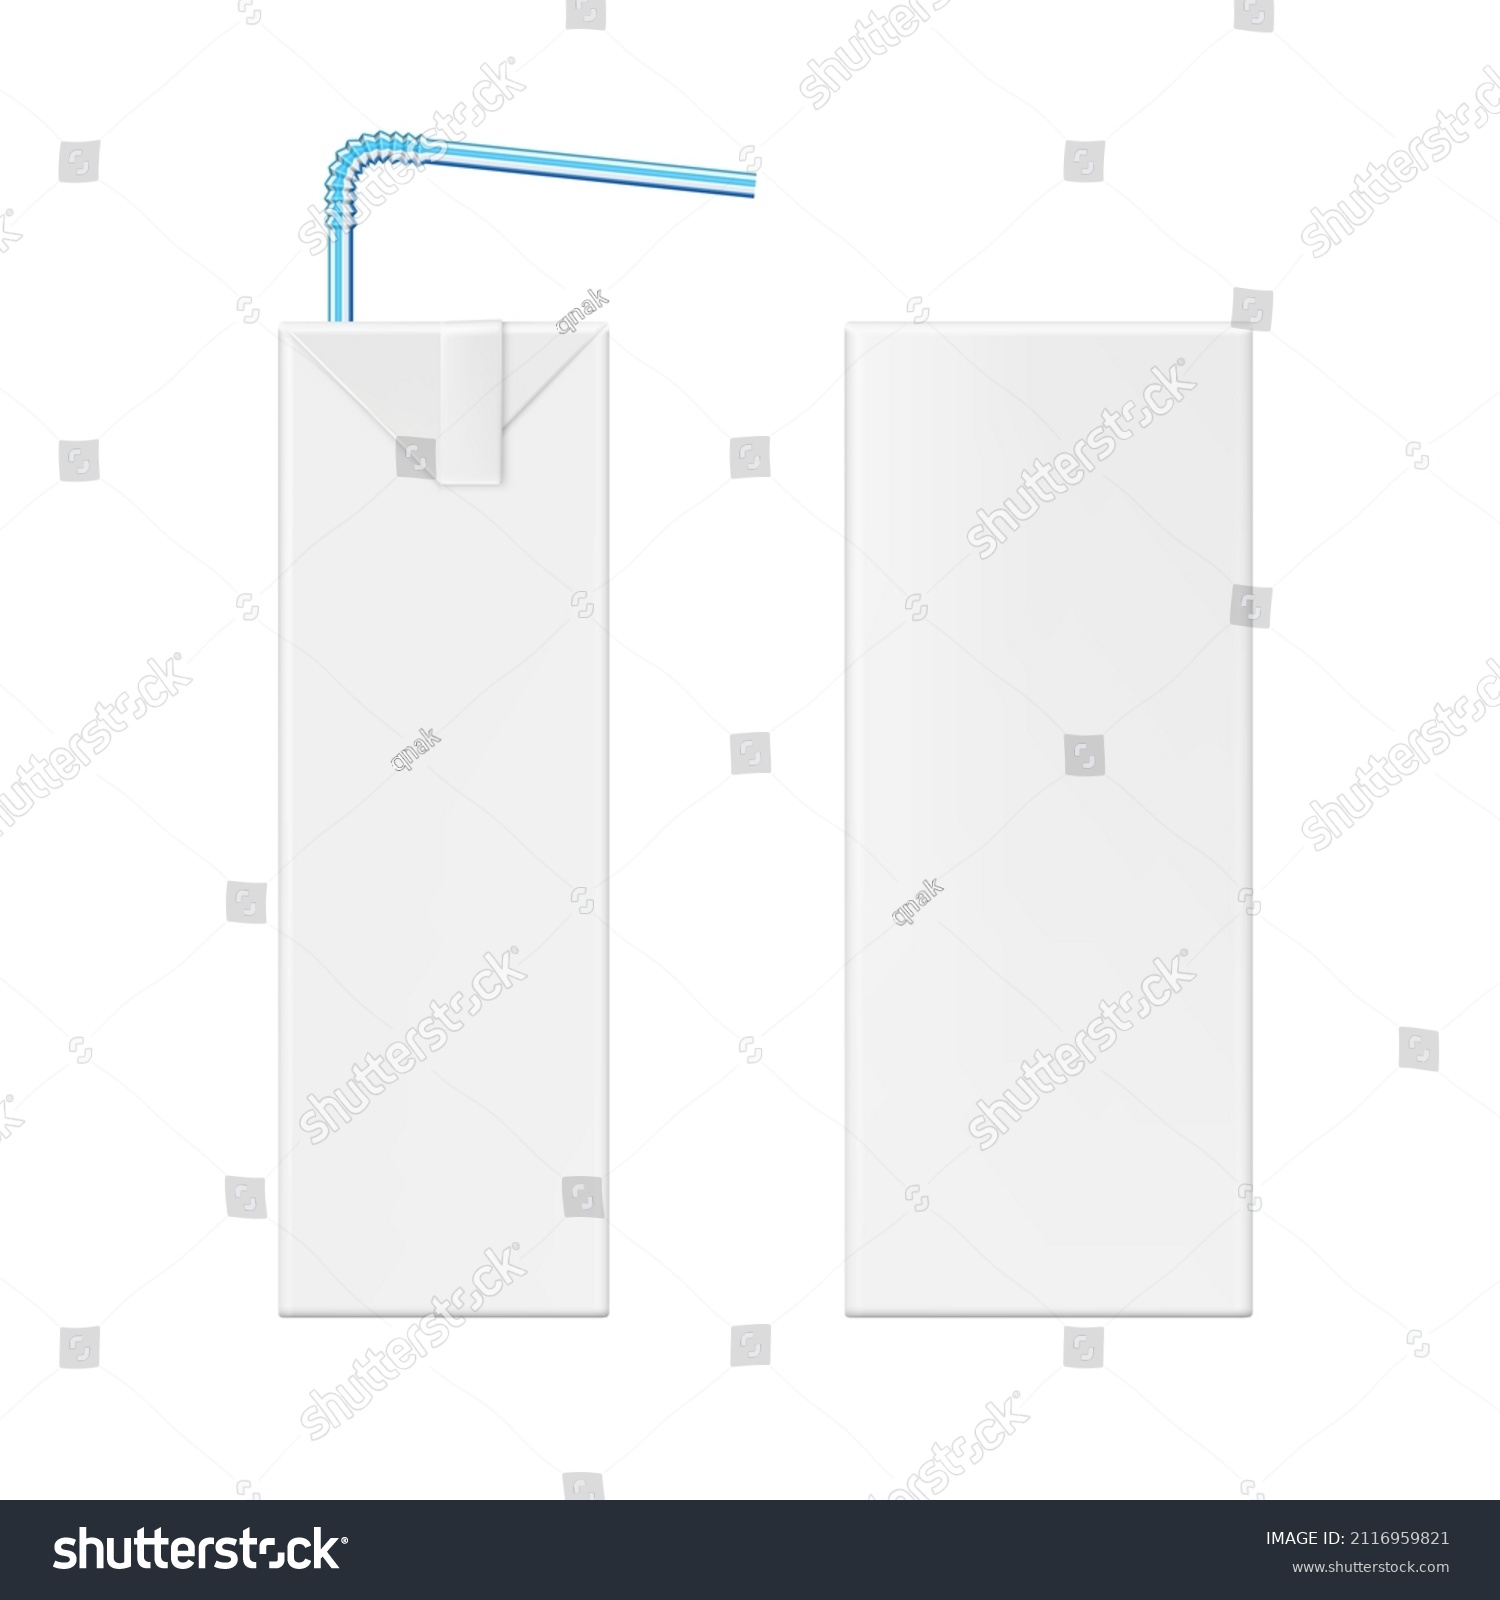 SVG of Mock-up of a small cardboard packaging for baby food, juice, dairy products. Vector 3d template with side and front view. Paper box with a tube. svg